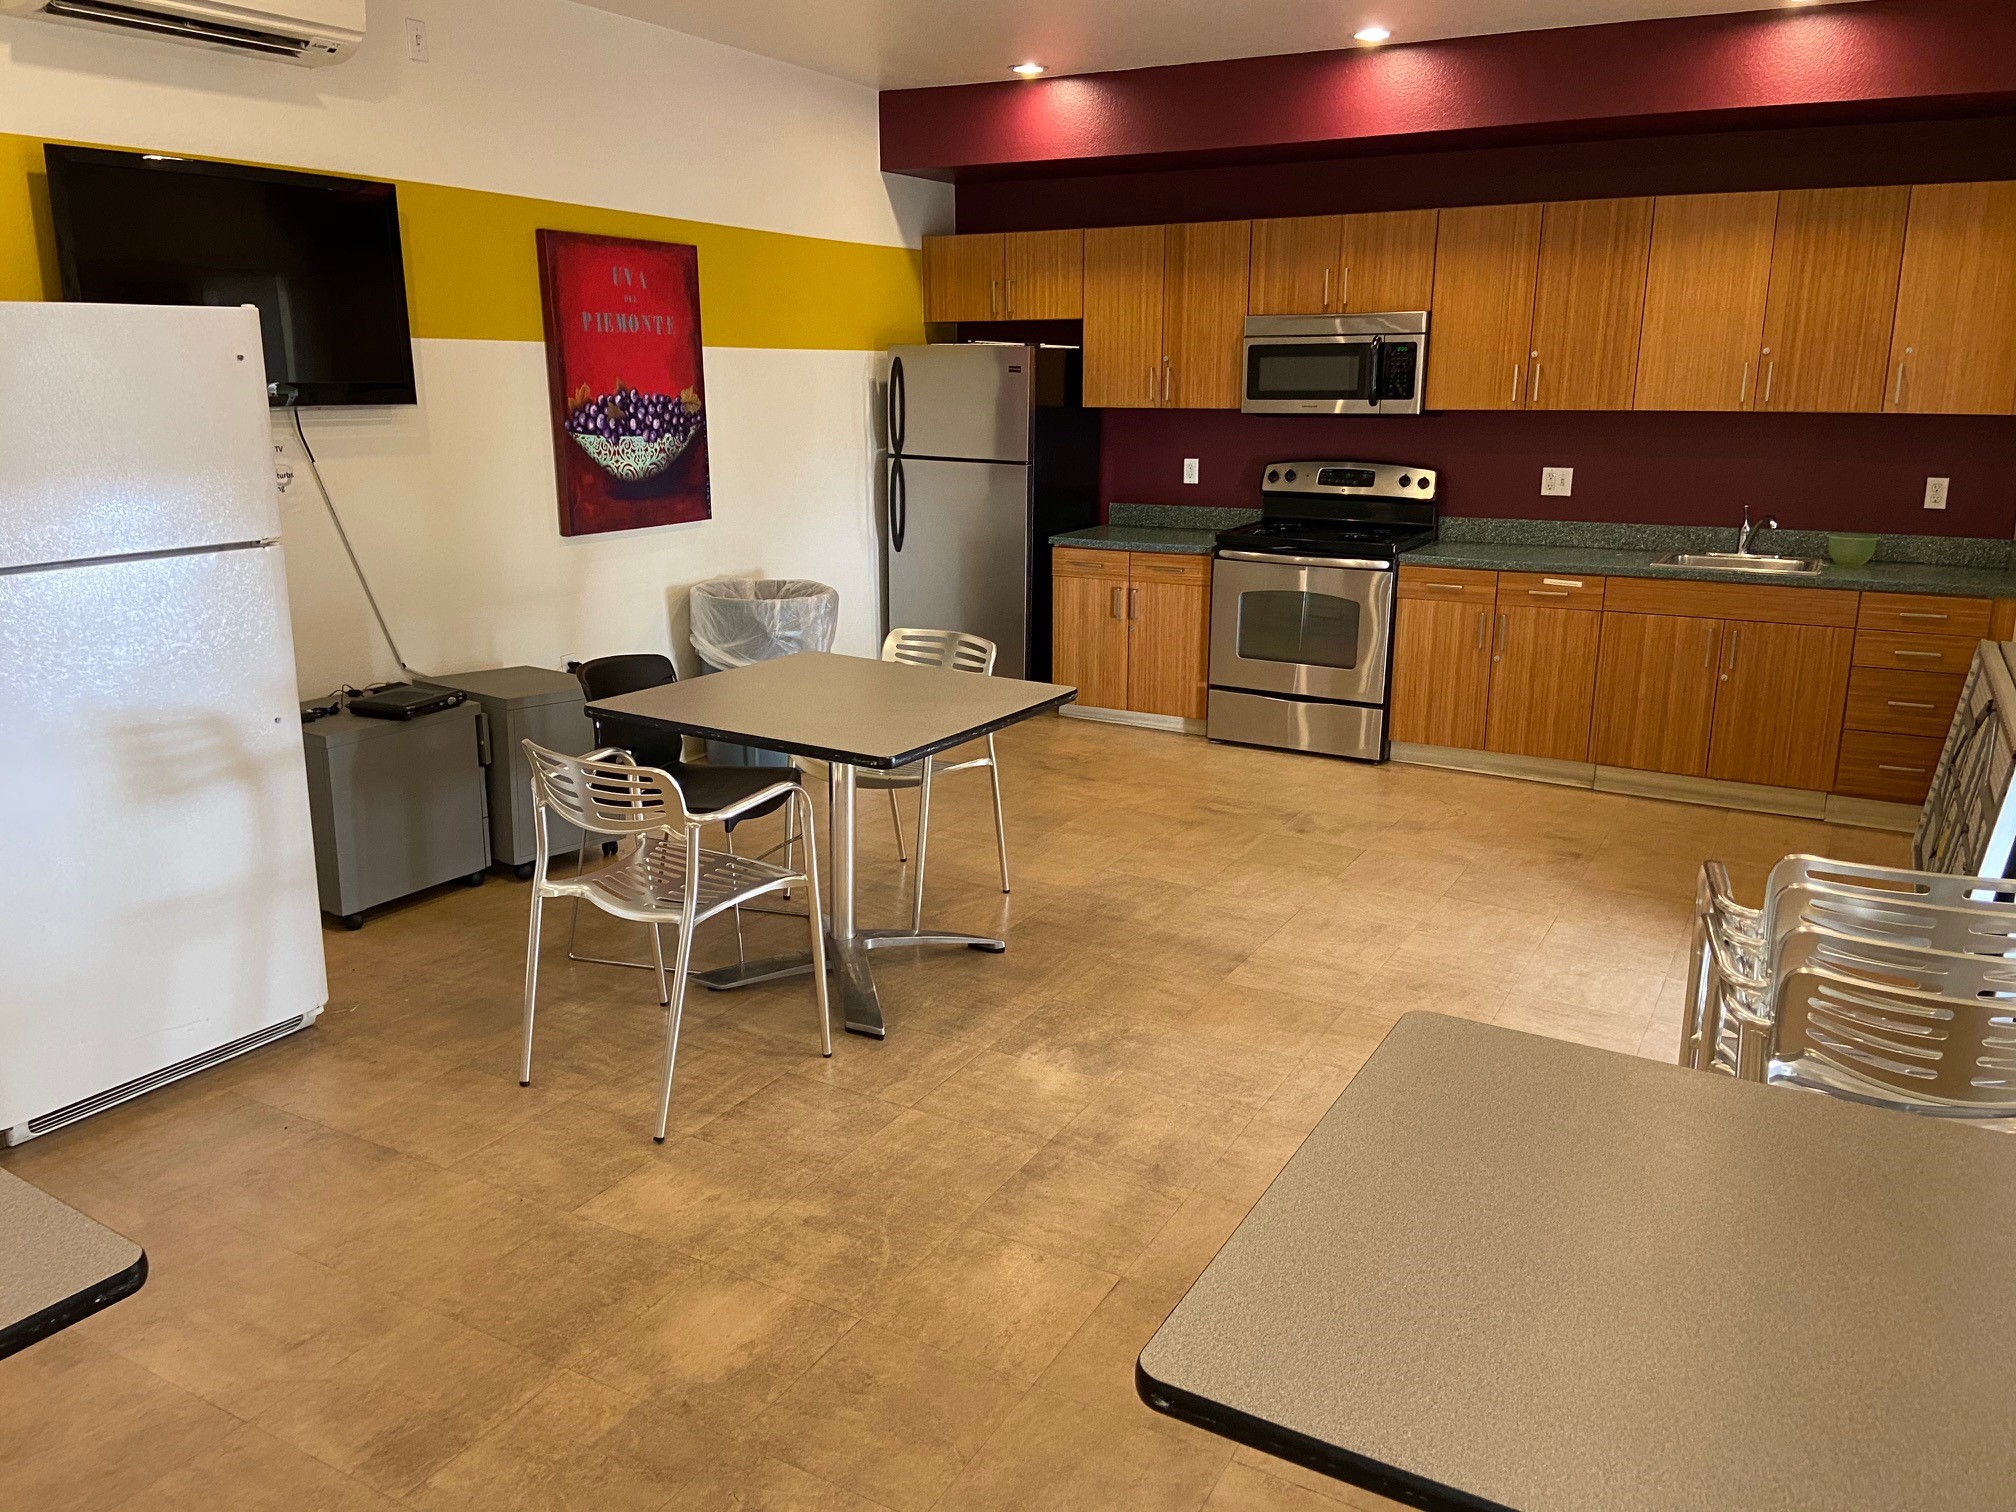 Interior view of a kitchen at Vendome Palms Apartments showing two refrigerators, stove, sink, tables and chairs